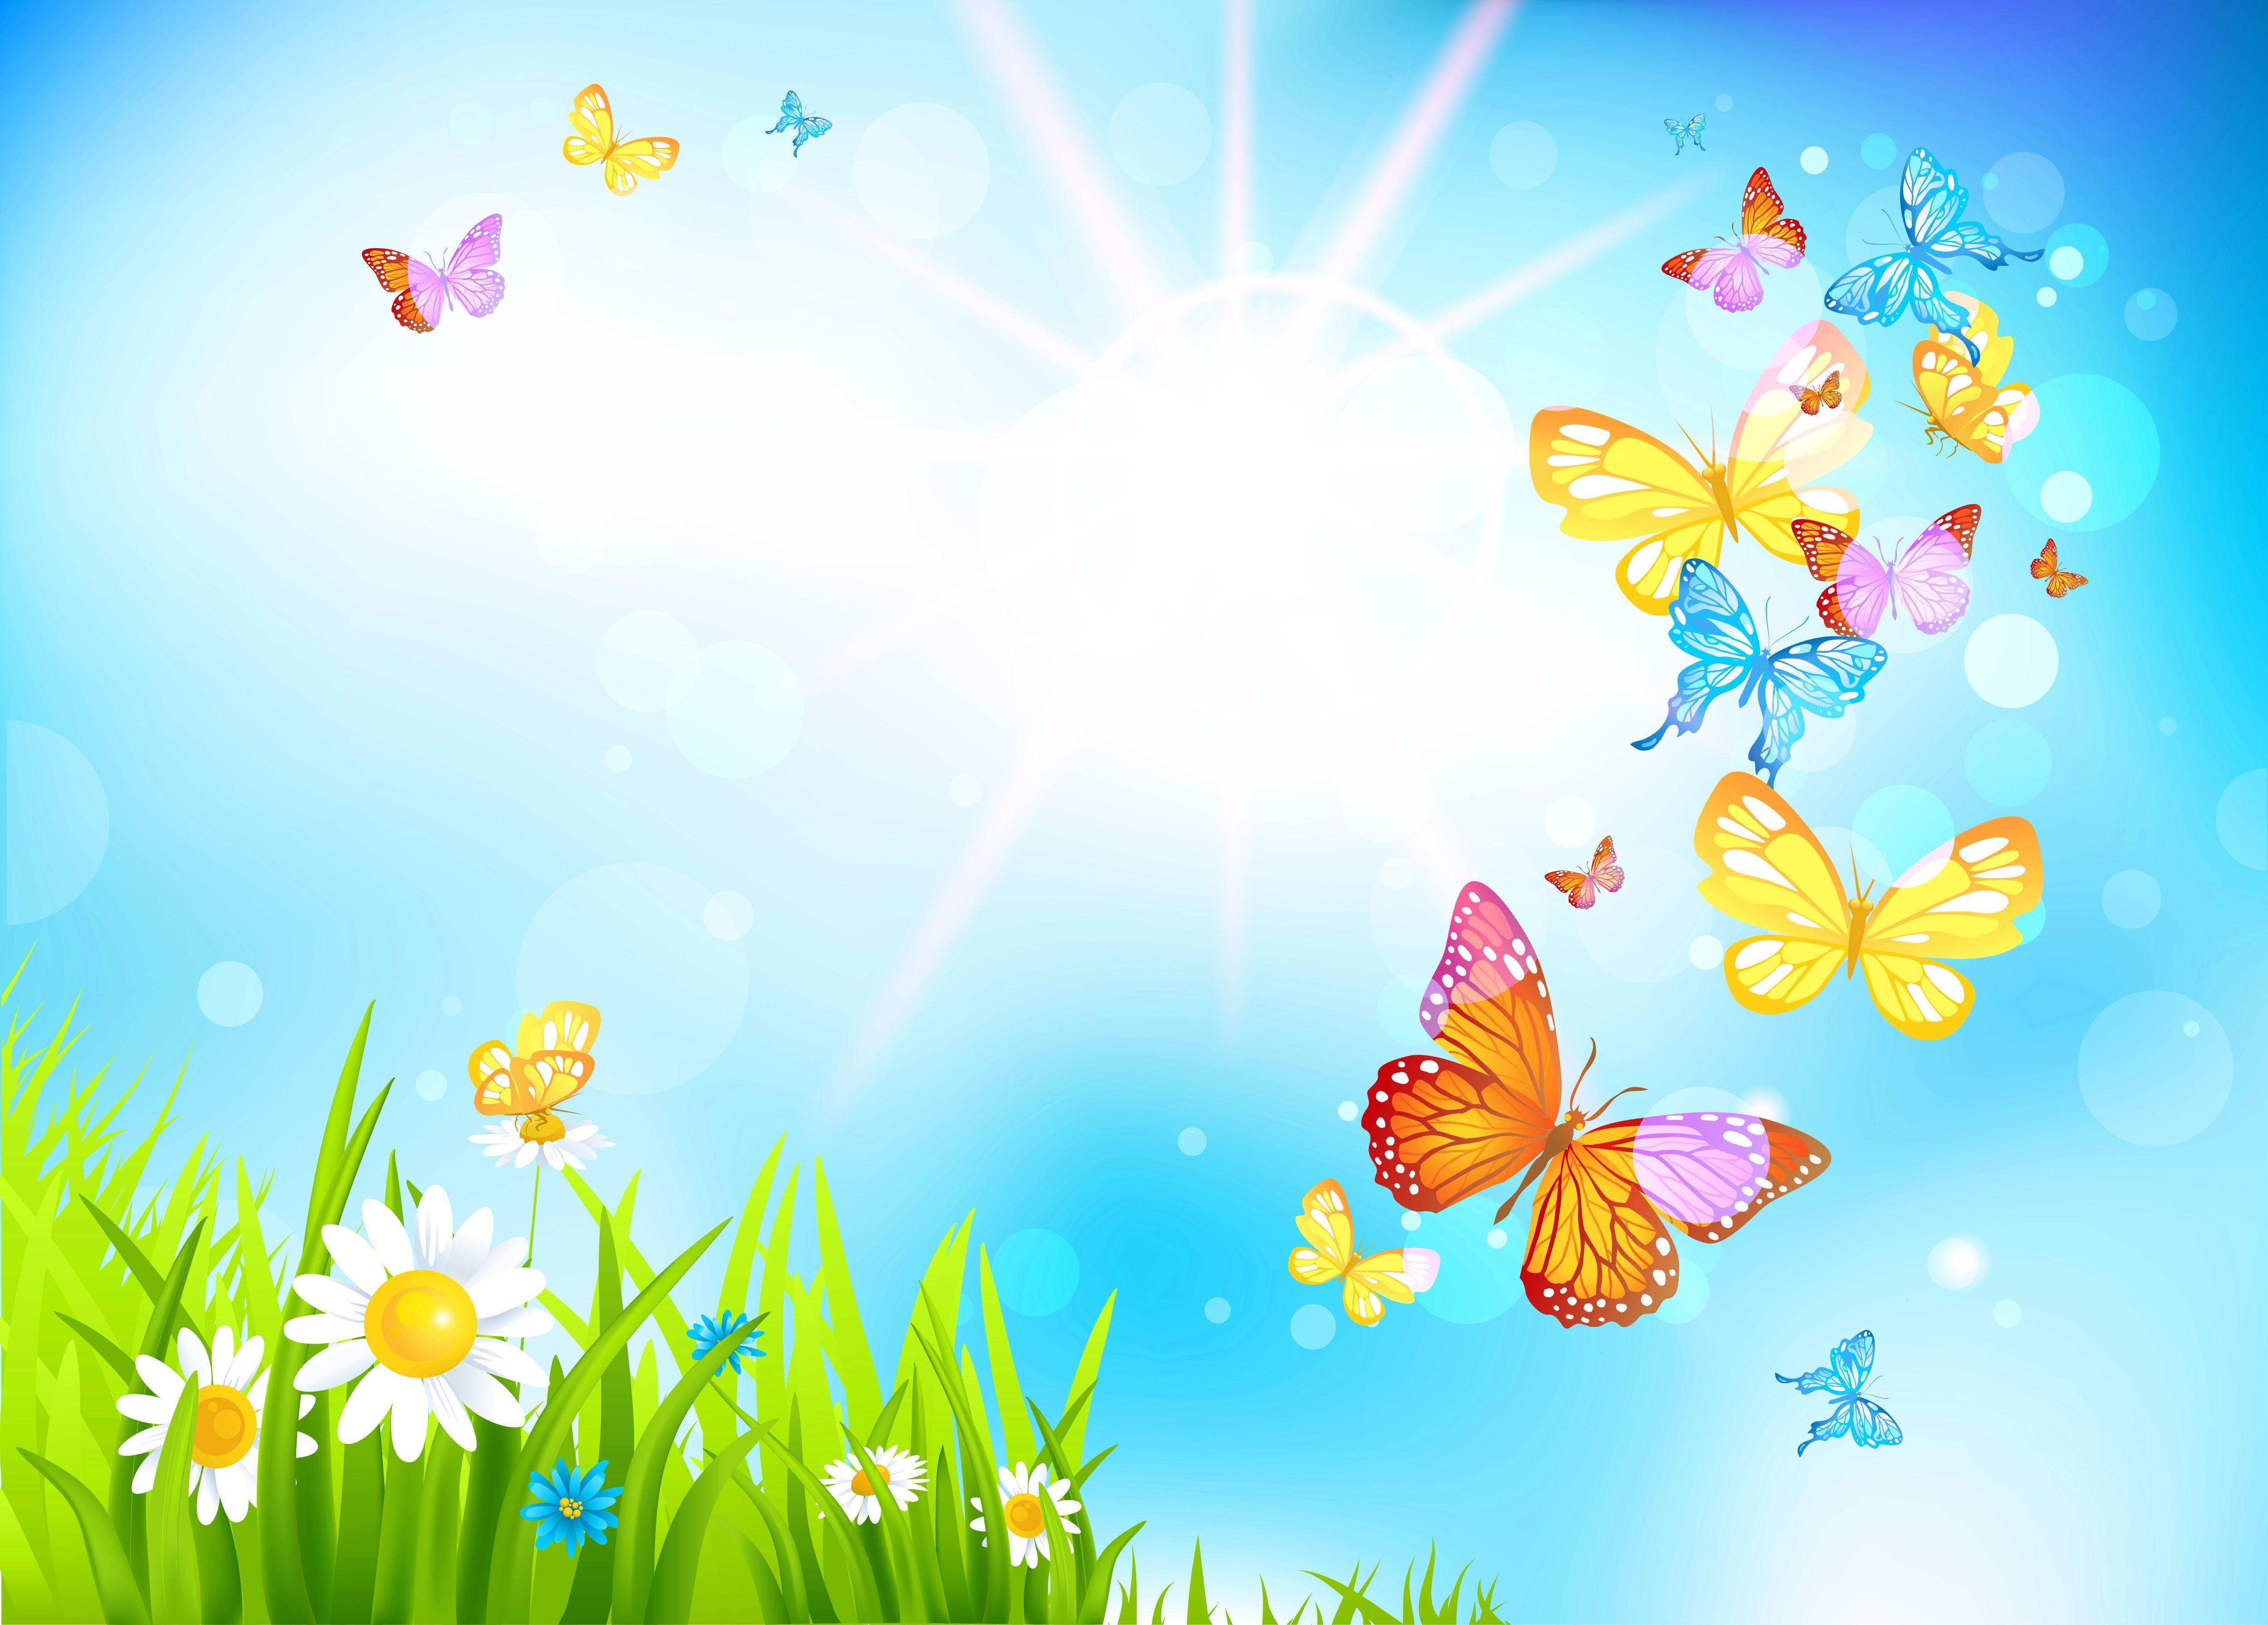 Spring_Butterflies_?m=1426847194. Butterfly background, iPhone wallpaper high quality, Spring scene